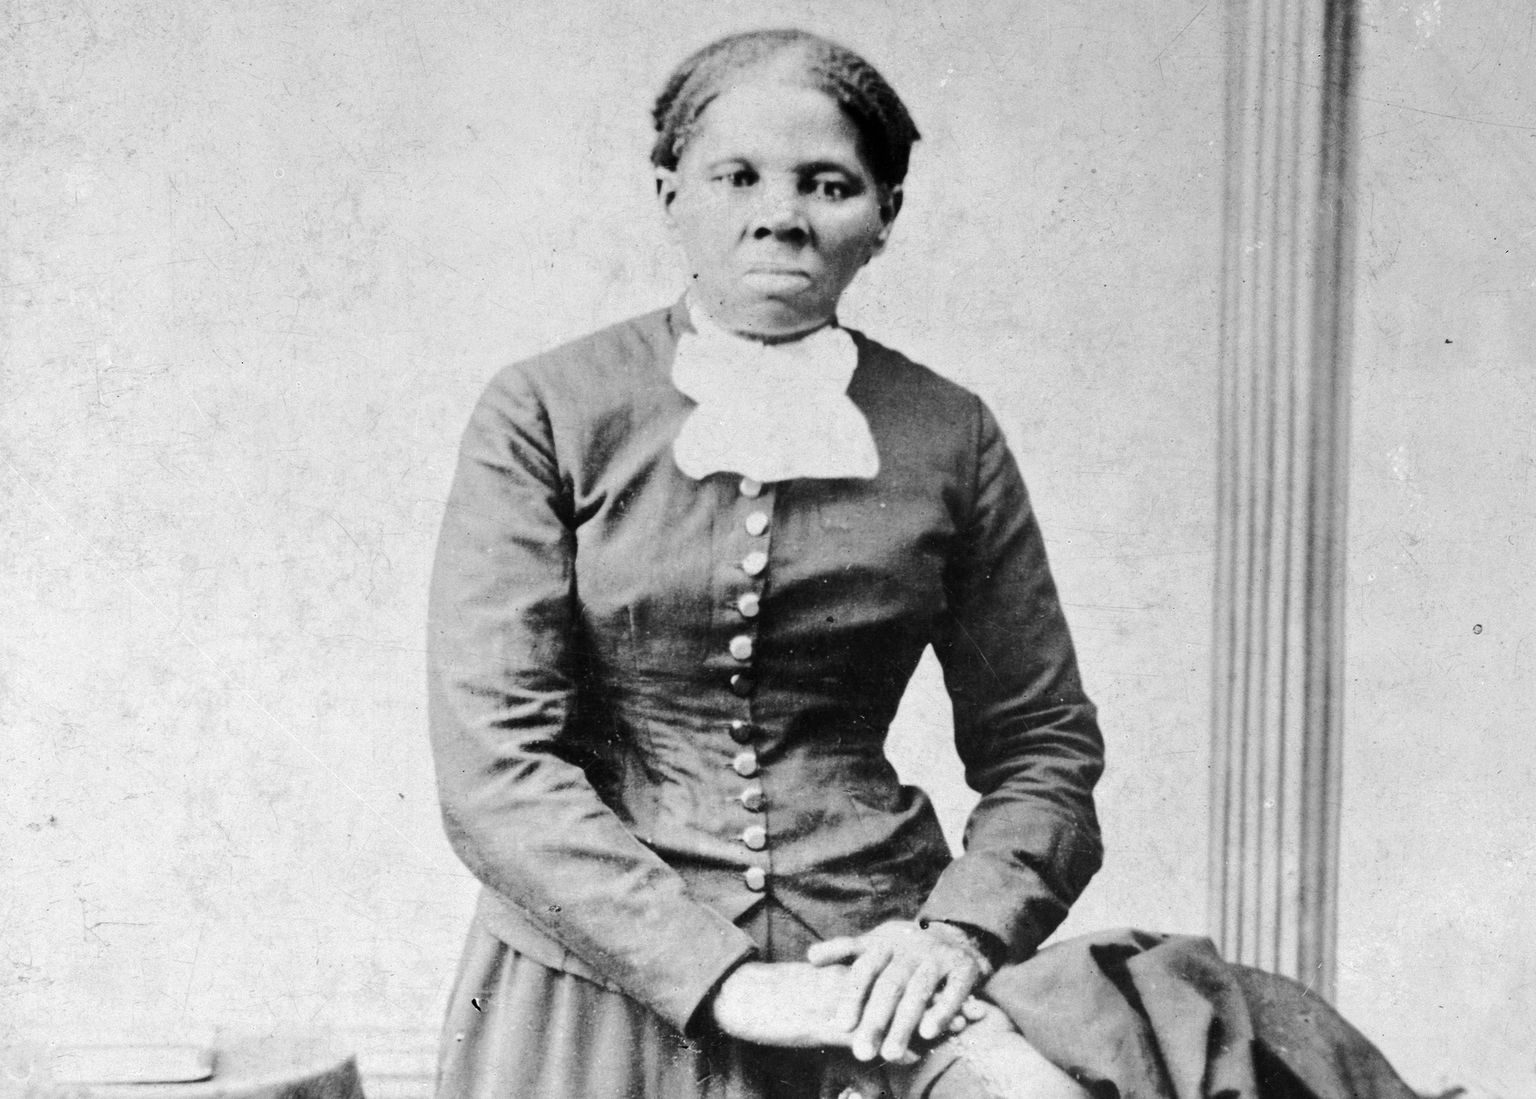 This image provided by the Library of Congress shows Harriet Tubman, between 1860 and 1875. A Treasury official said Wednesday, April 20, 2016, that Secretary Jacob Lew has decided to put Tubman on the $20 bill, making her the first woman on U.S. paper currency in 100 years. (H.B. Lindsley/Library of Congress via AP) MANDATORY CREDIT